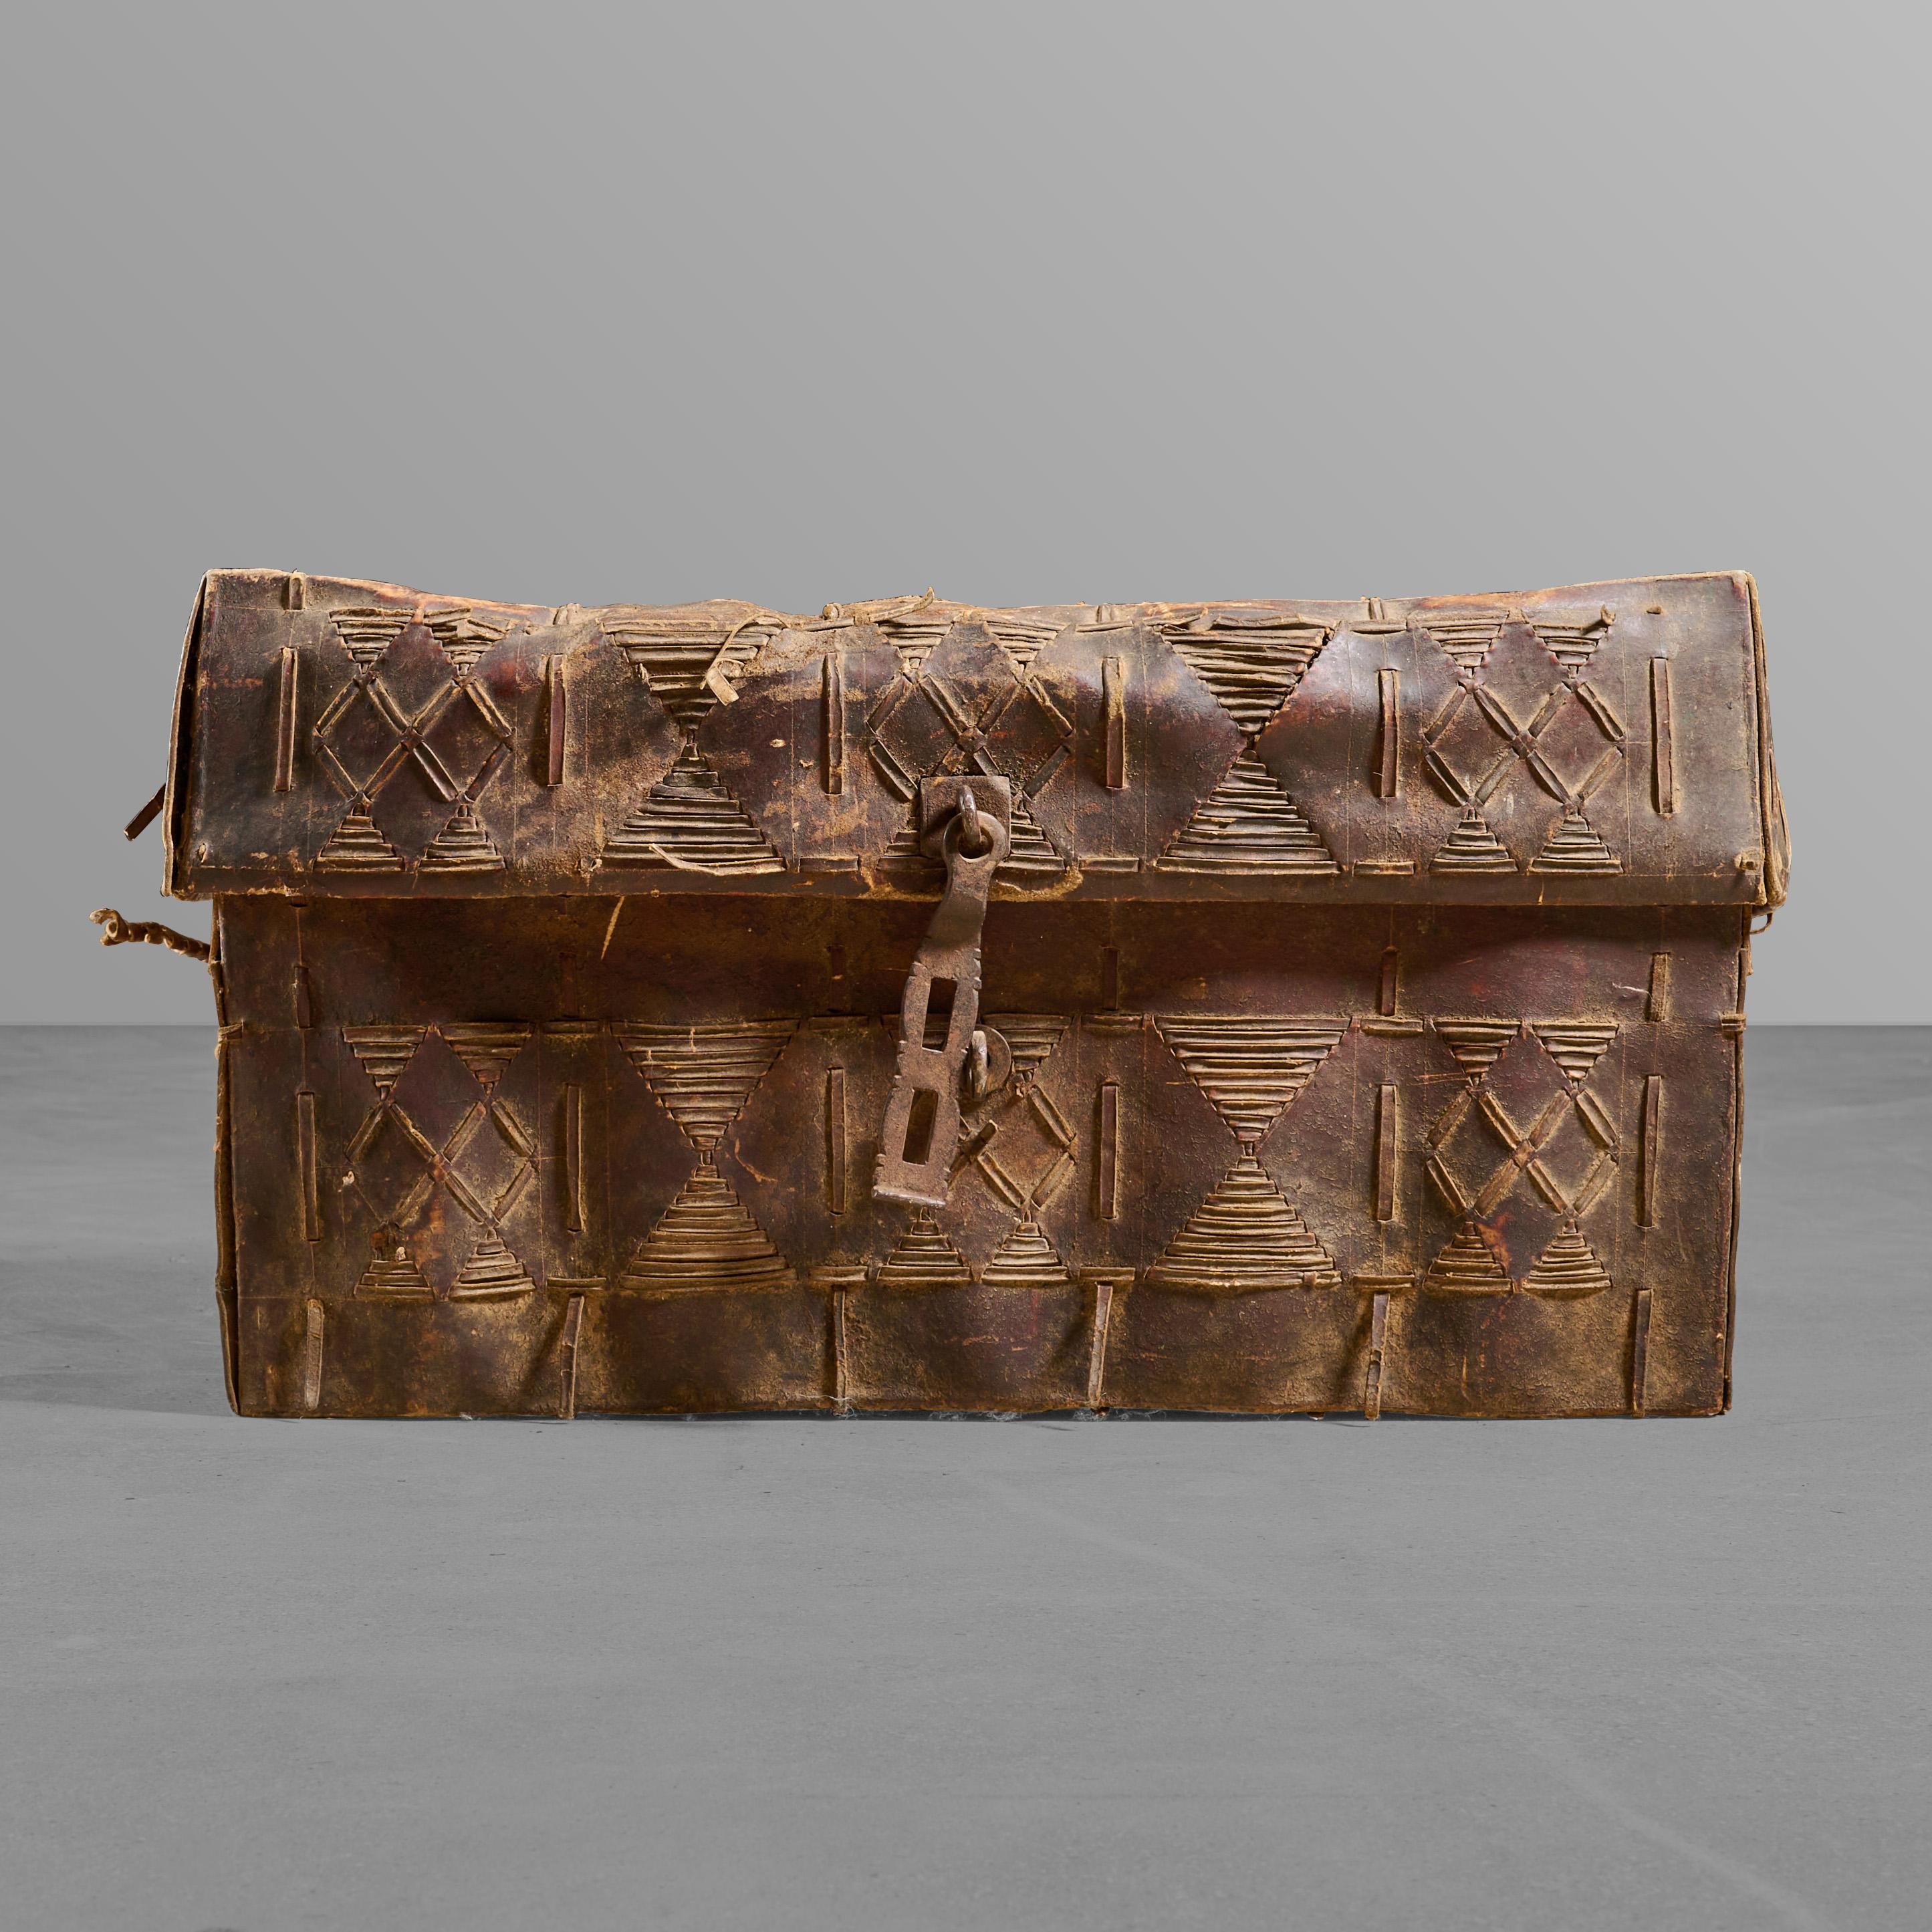 Hide trunk made by gauchos for storage and travel. Nice clasp.

